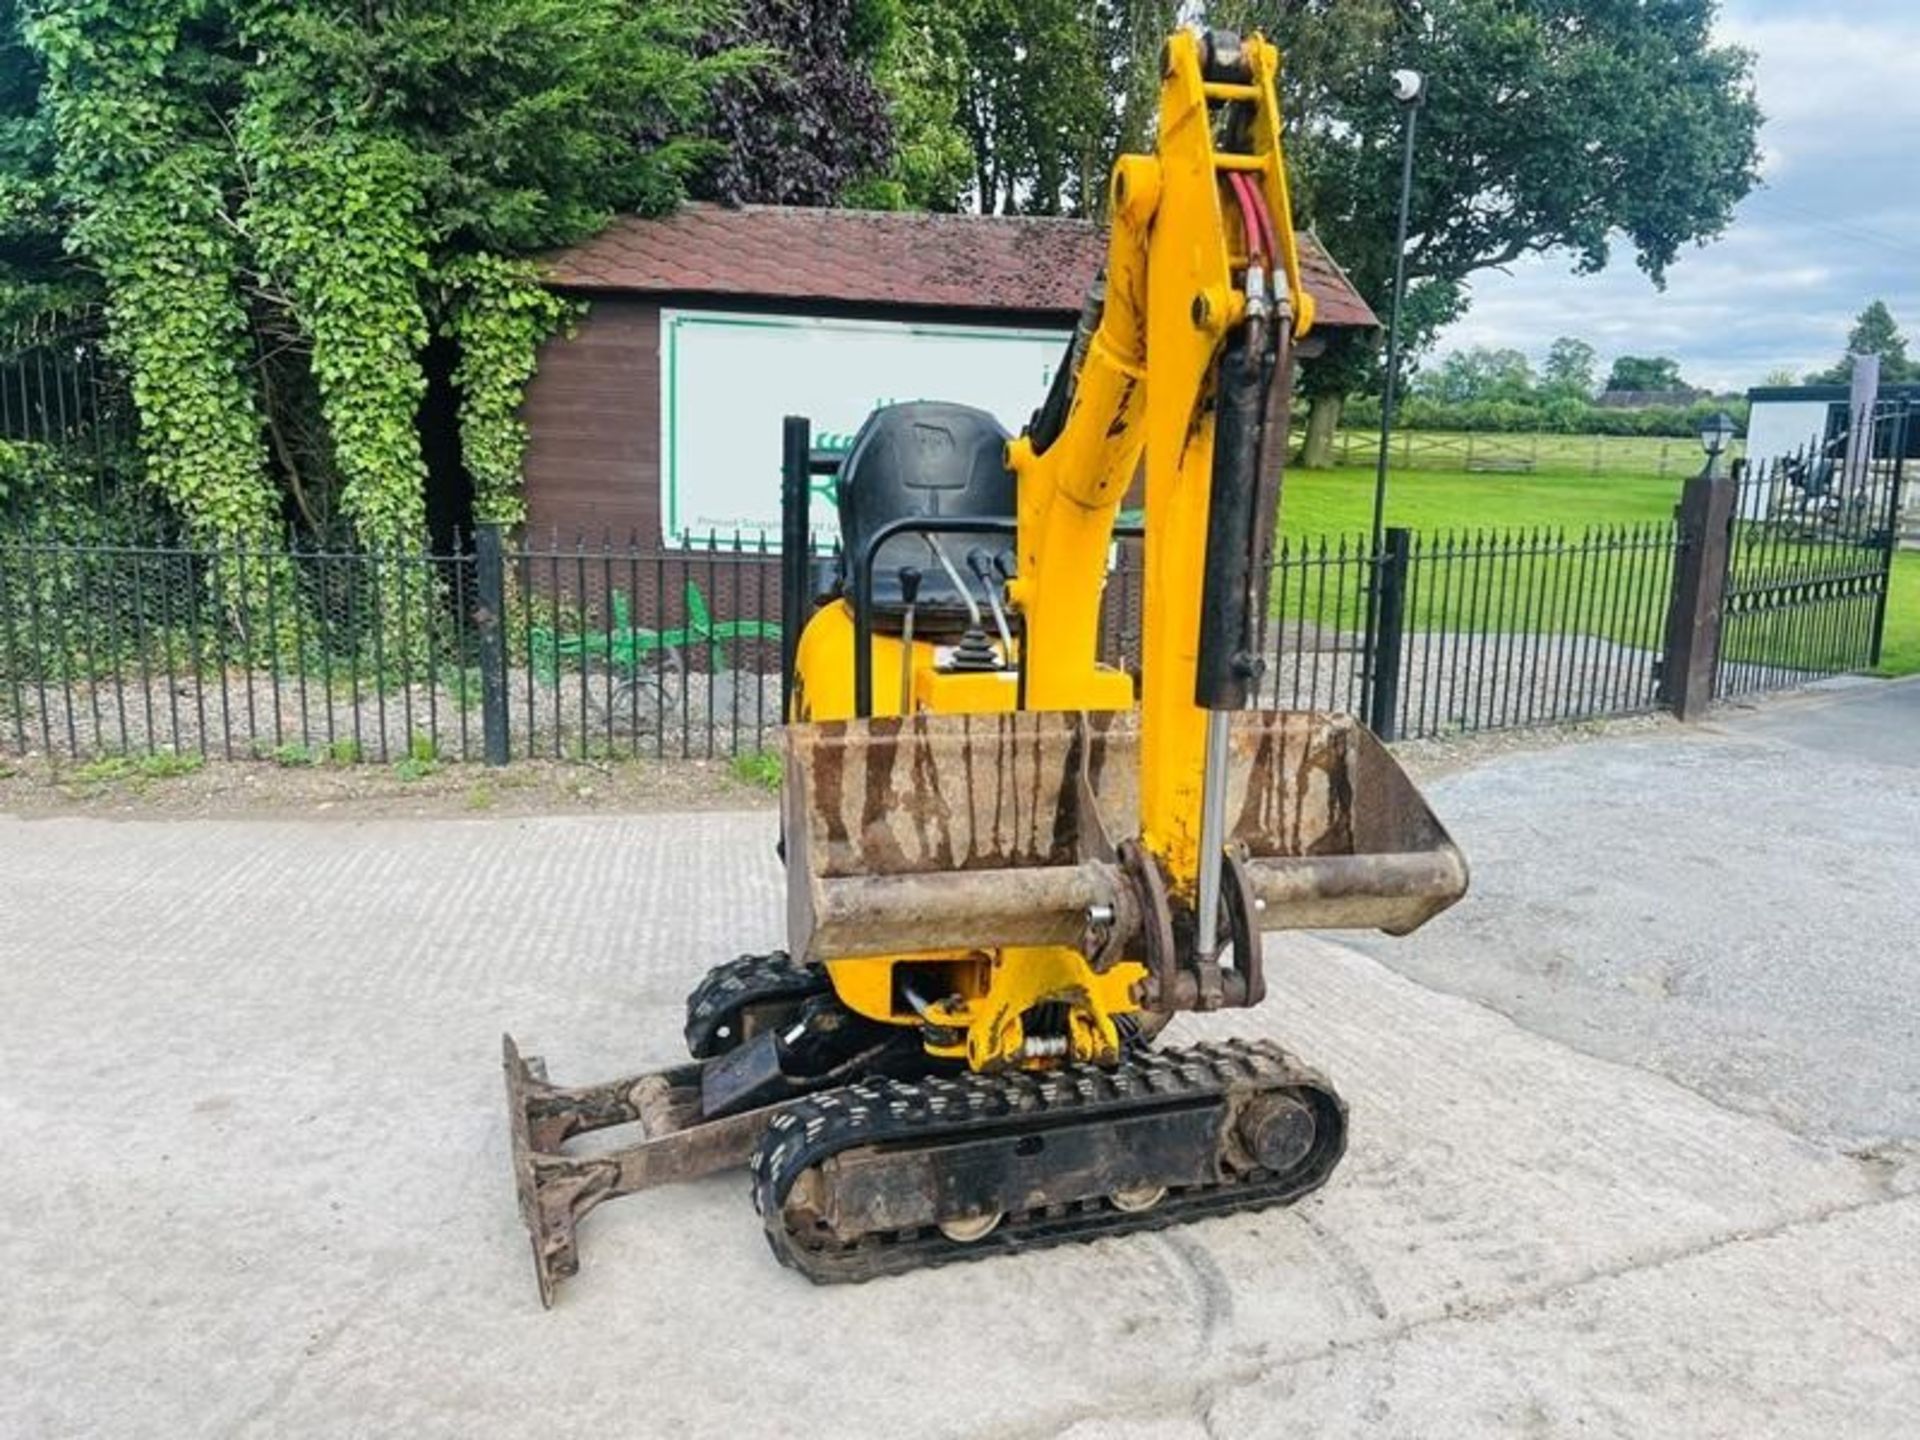 JCB MICRO DIGGER *2753 HOURS* C/W EXPANDING & RUBBER TRACKS - Image 2 of 7